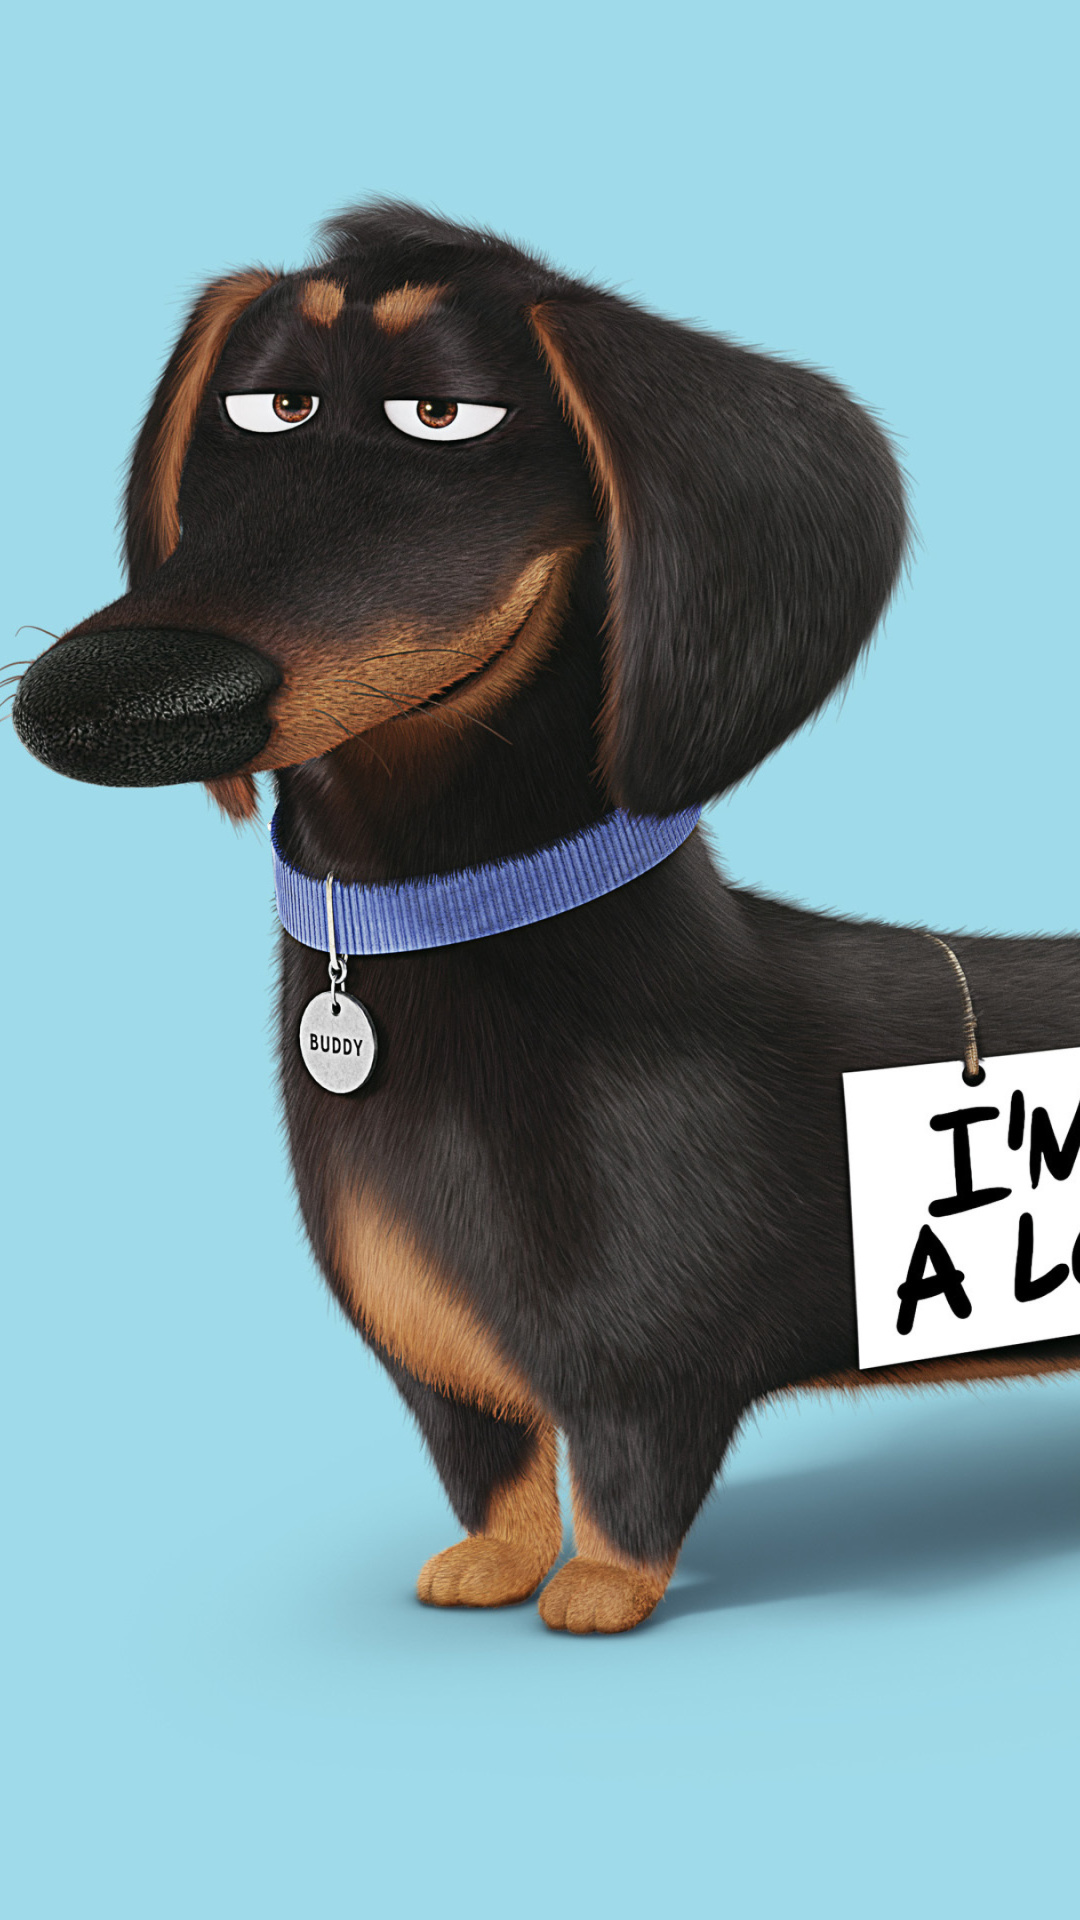 Buddy from The Secret Life of Pets wallpaper 1080x1920